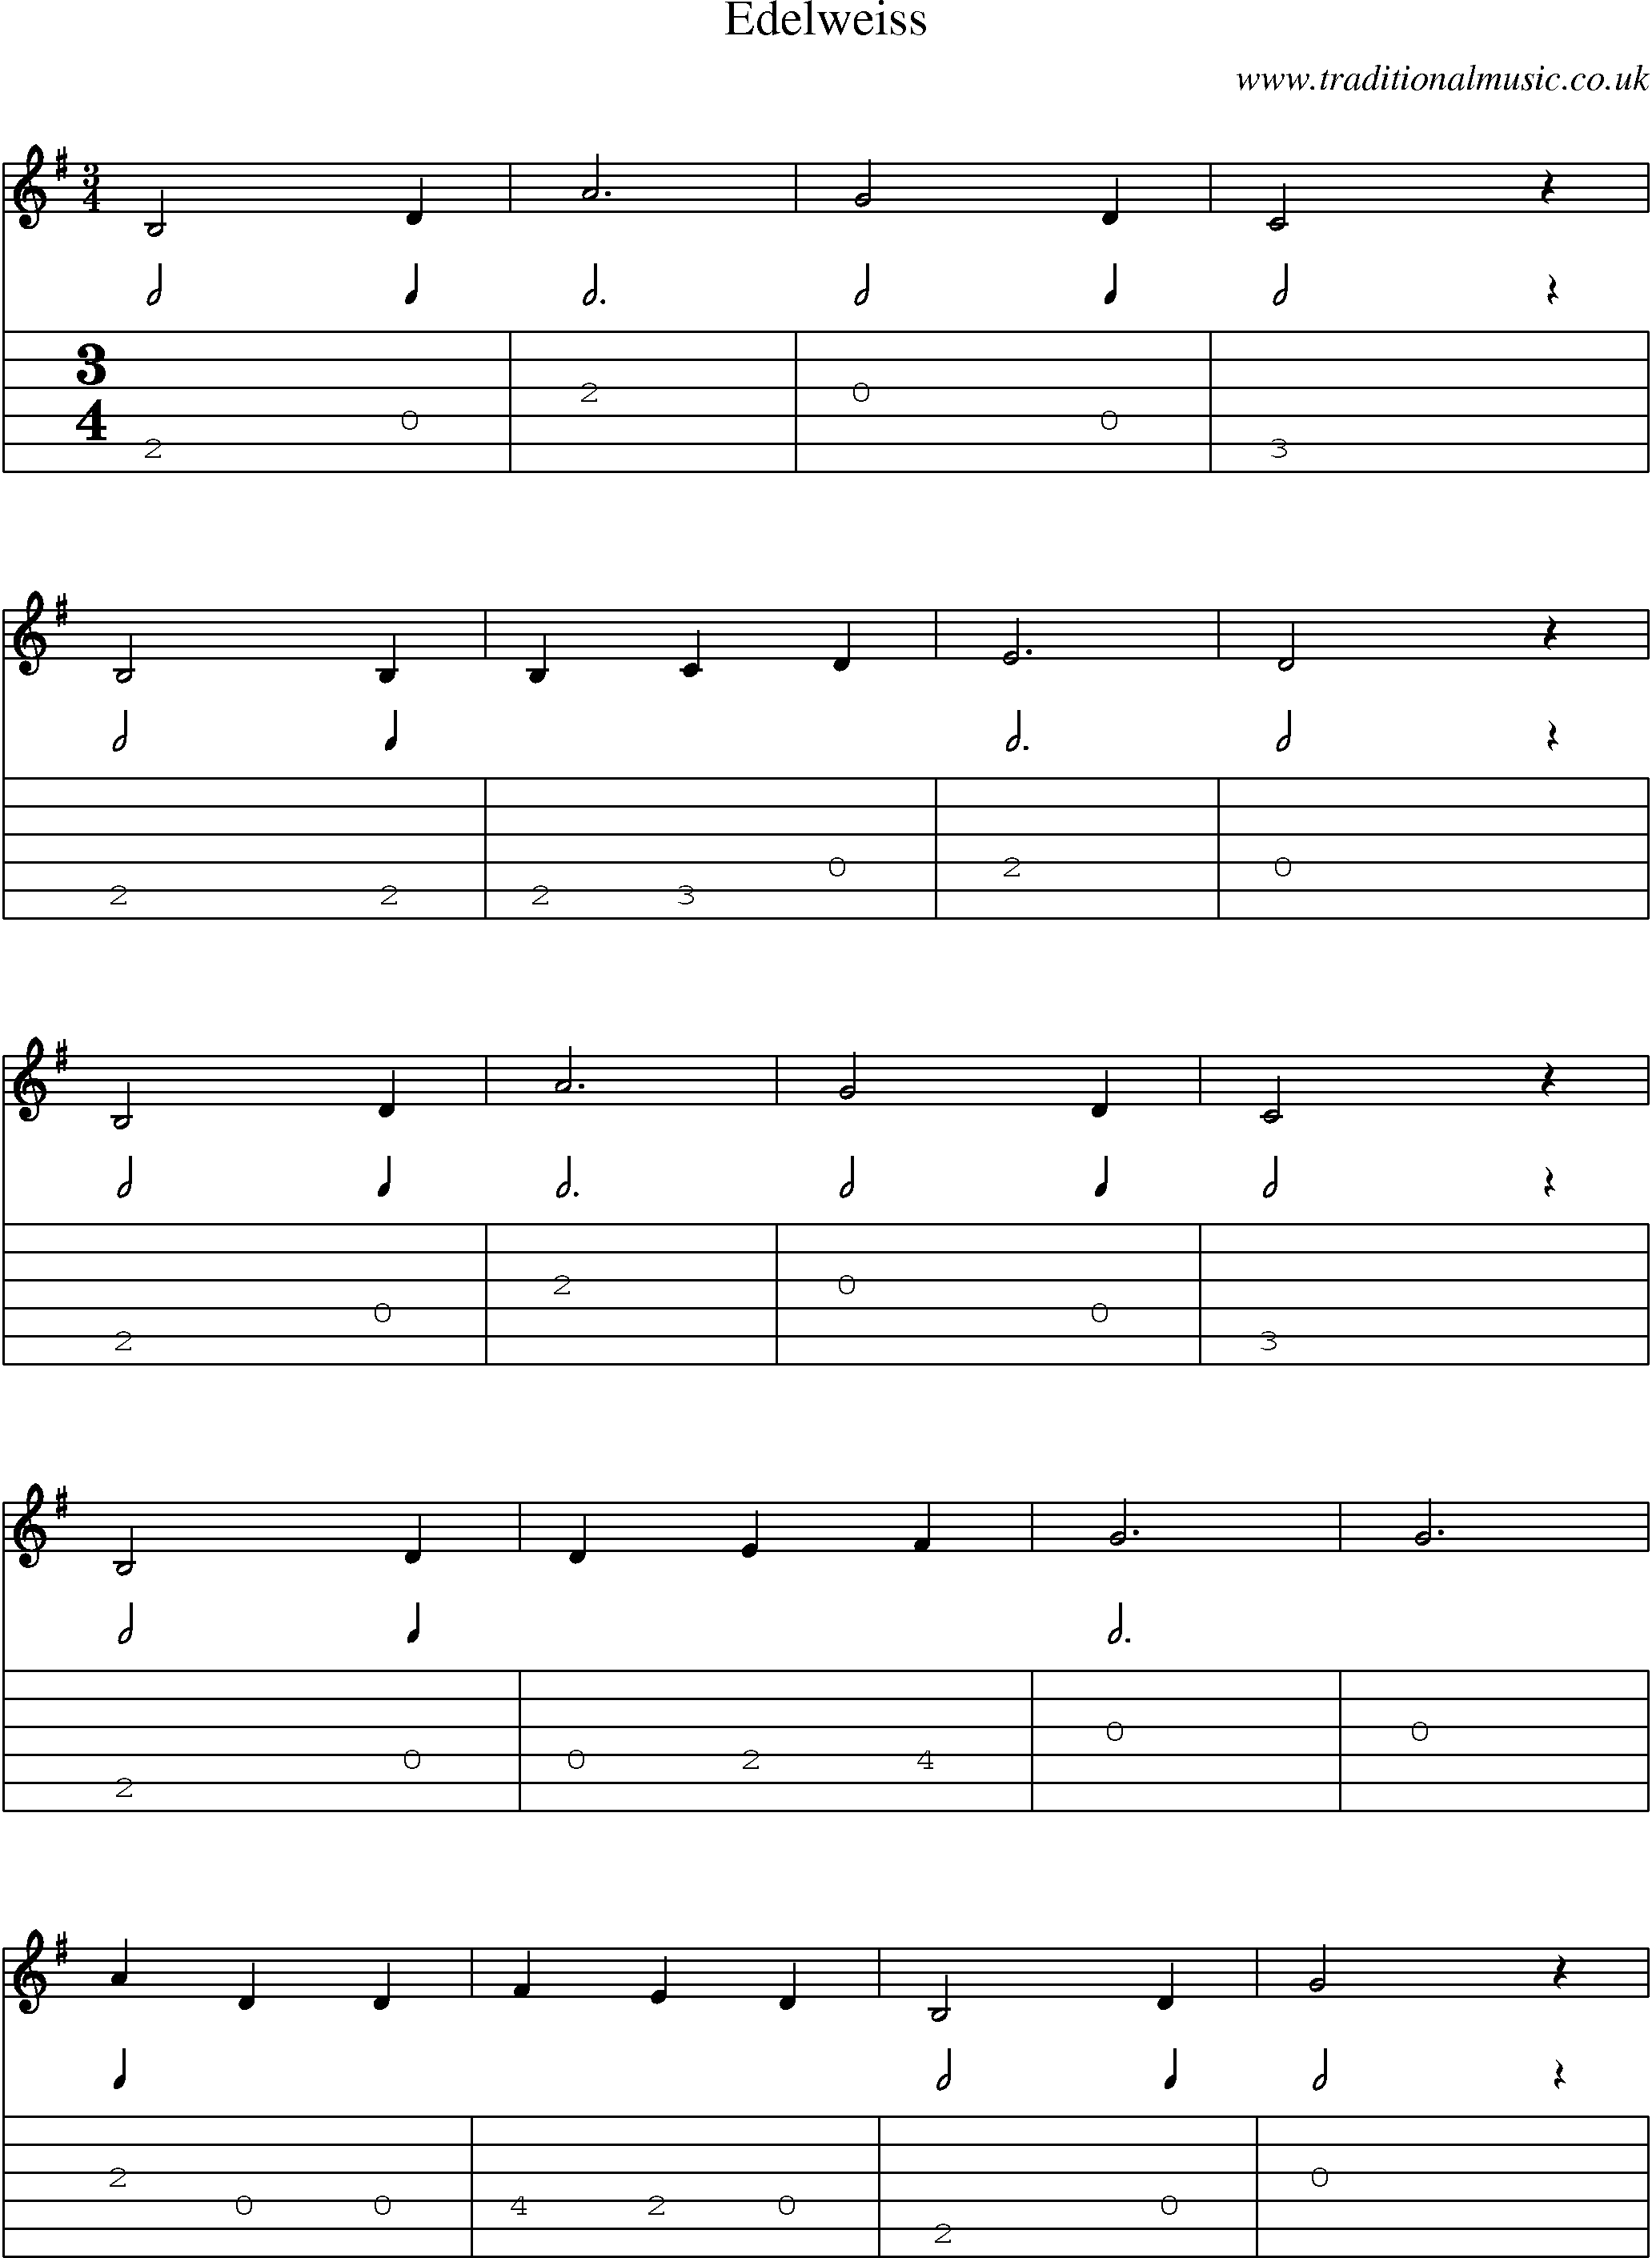 Music Score and Guitar Tabs for Edelweiss